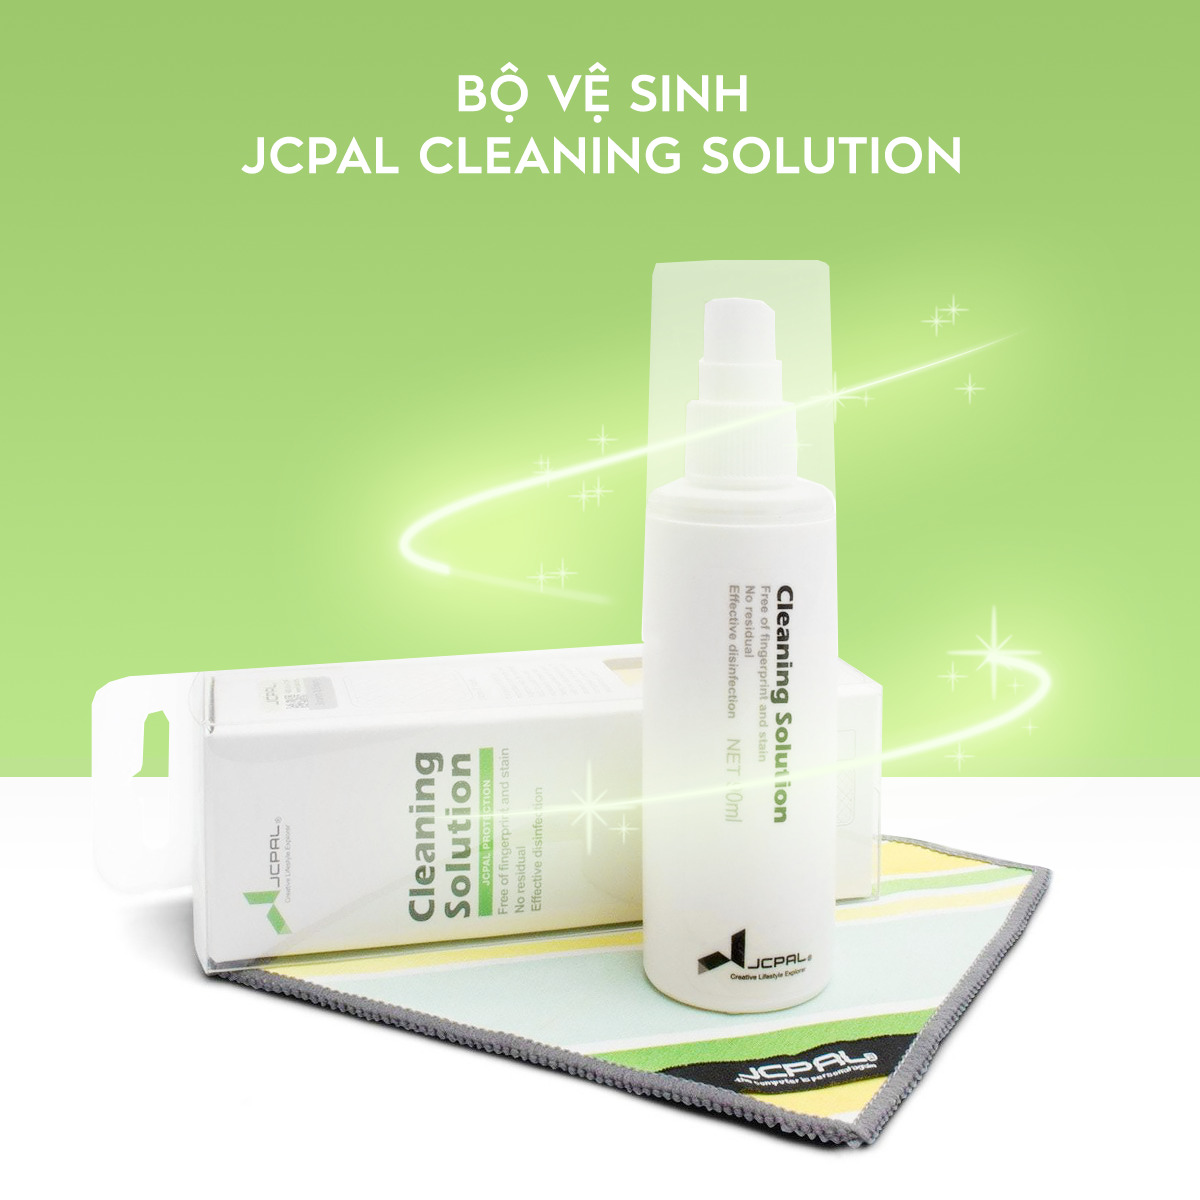 bo-ve-sinh-jcpal-cleaning-solution-d